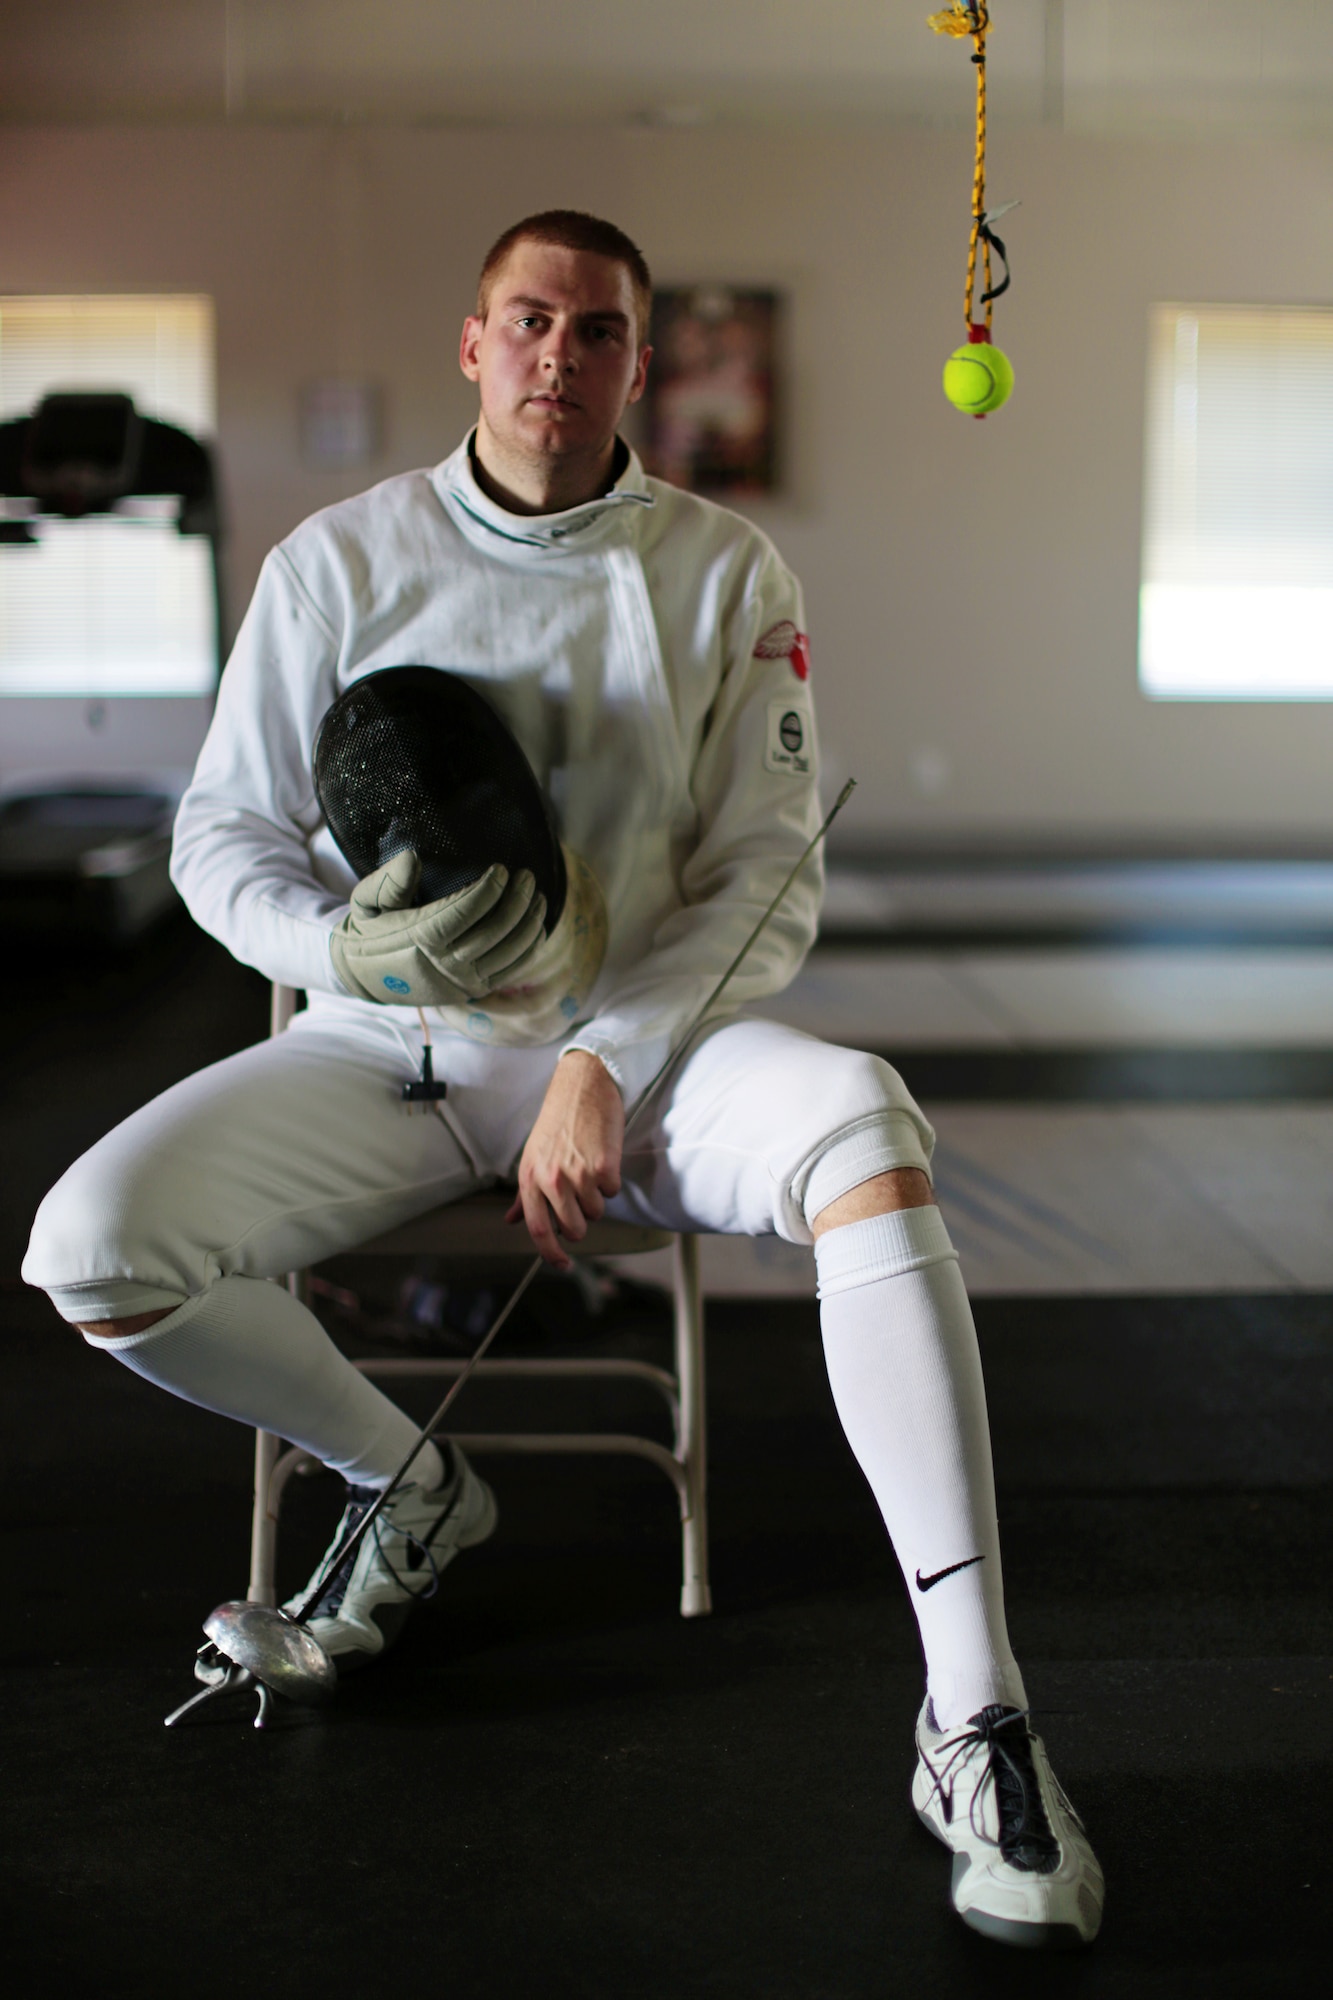 COLORADO SPRINGS, Colo. -- Weston Kelsey, 310th Force Support Squadron supply officer and three-time Olympian, poses for a photo after a practice session at the U.S. Olympic Training Center June 8, 2012. Kelsey, former U.S. Air Force Academy epee fencer, was named the 2011 U.S. Air Force Male Athlete of the Year. (U.S. Air Force photo by Staff Sgt. Kathrine McDowell)